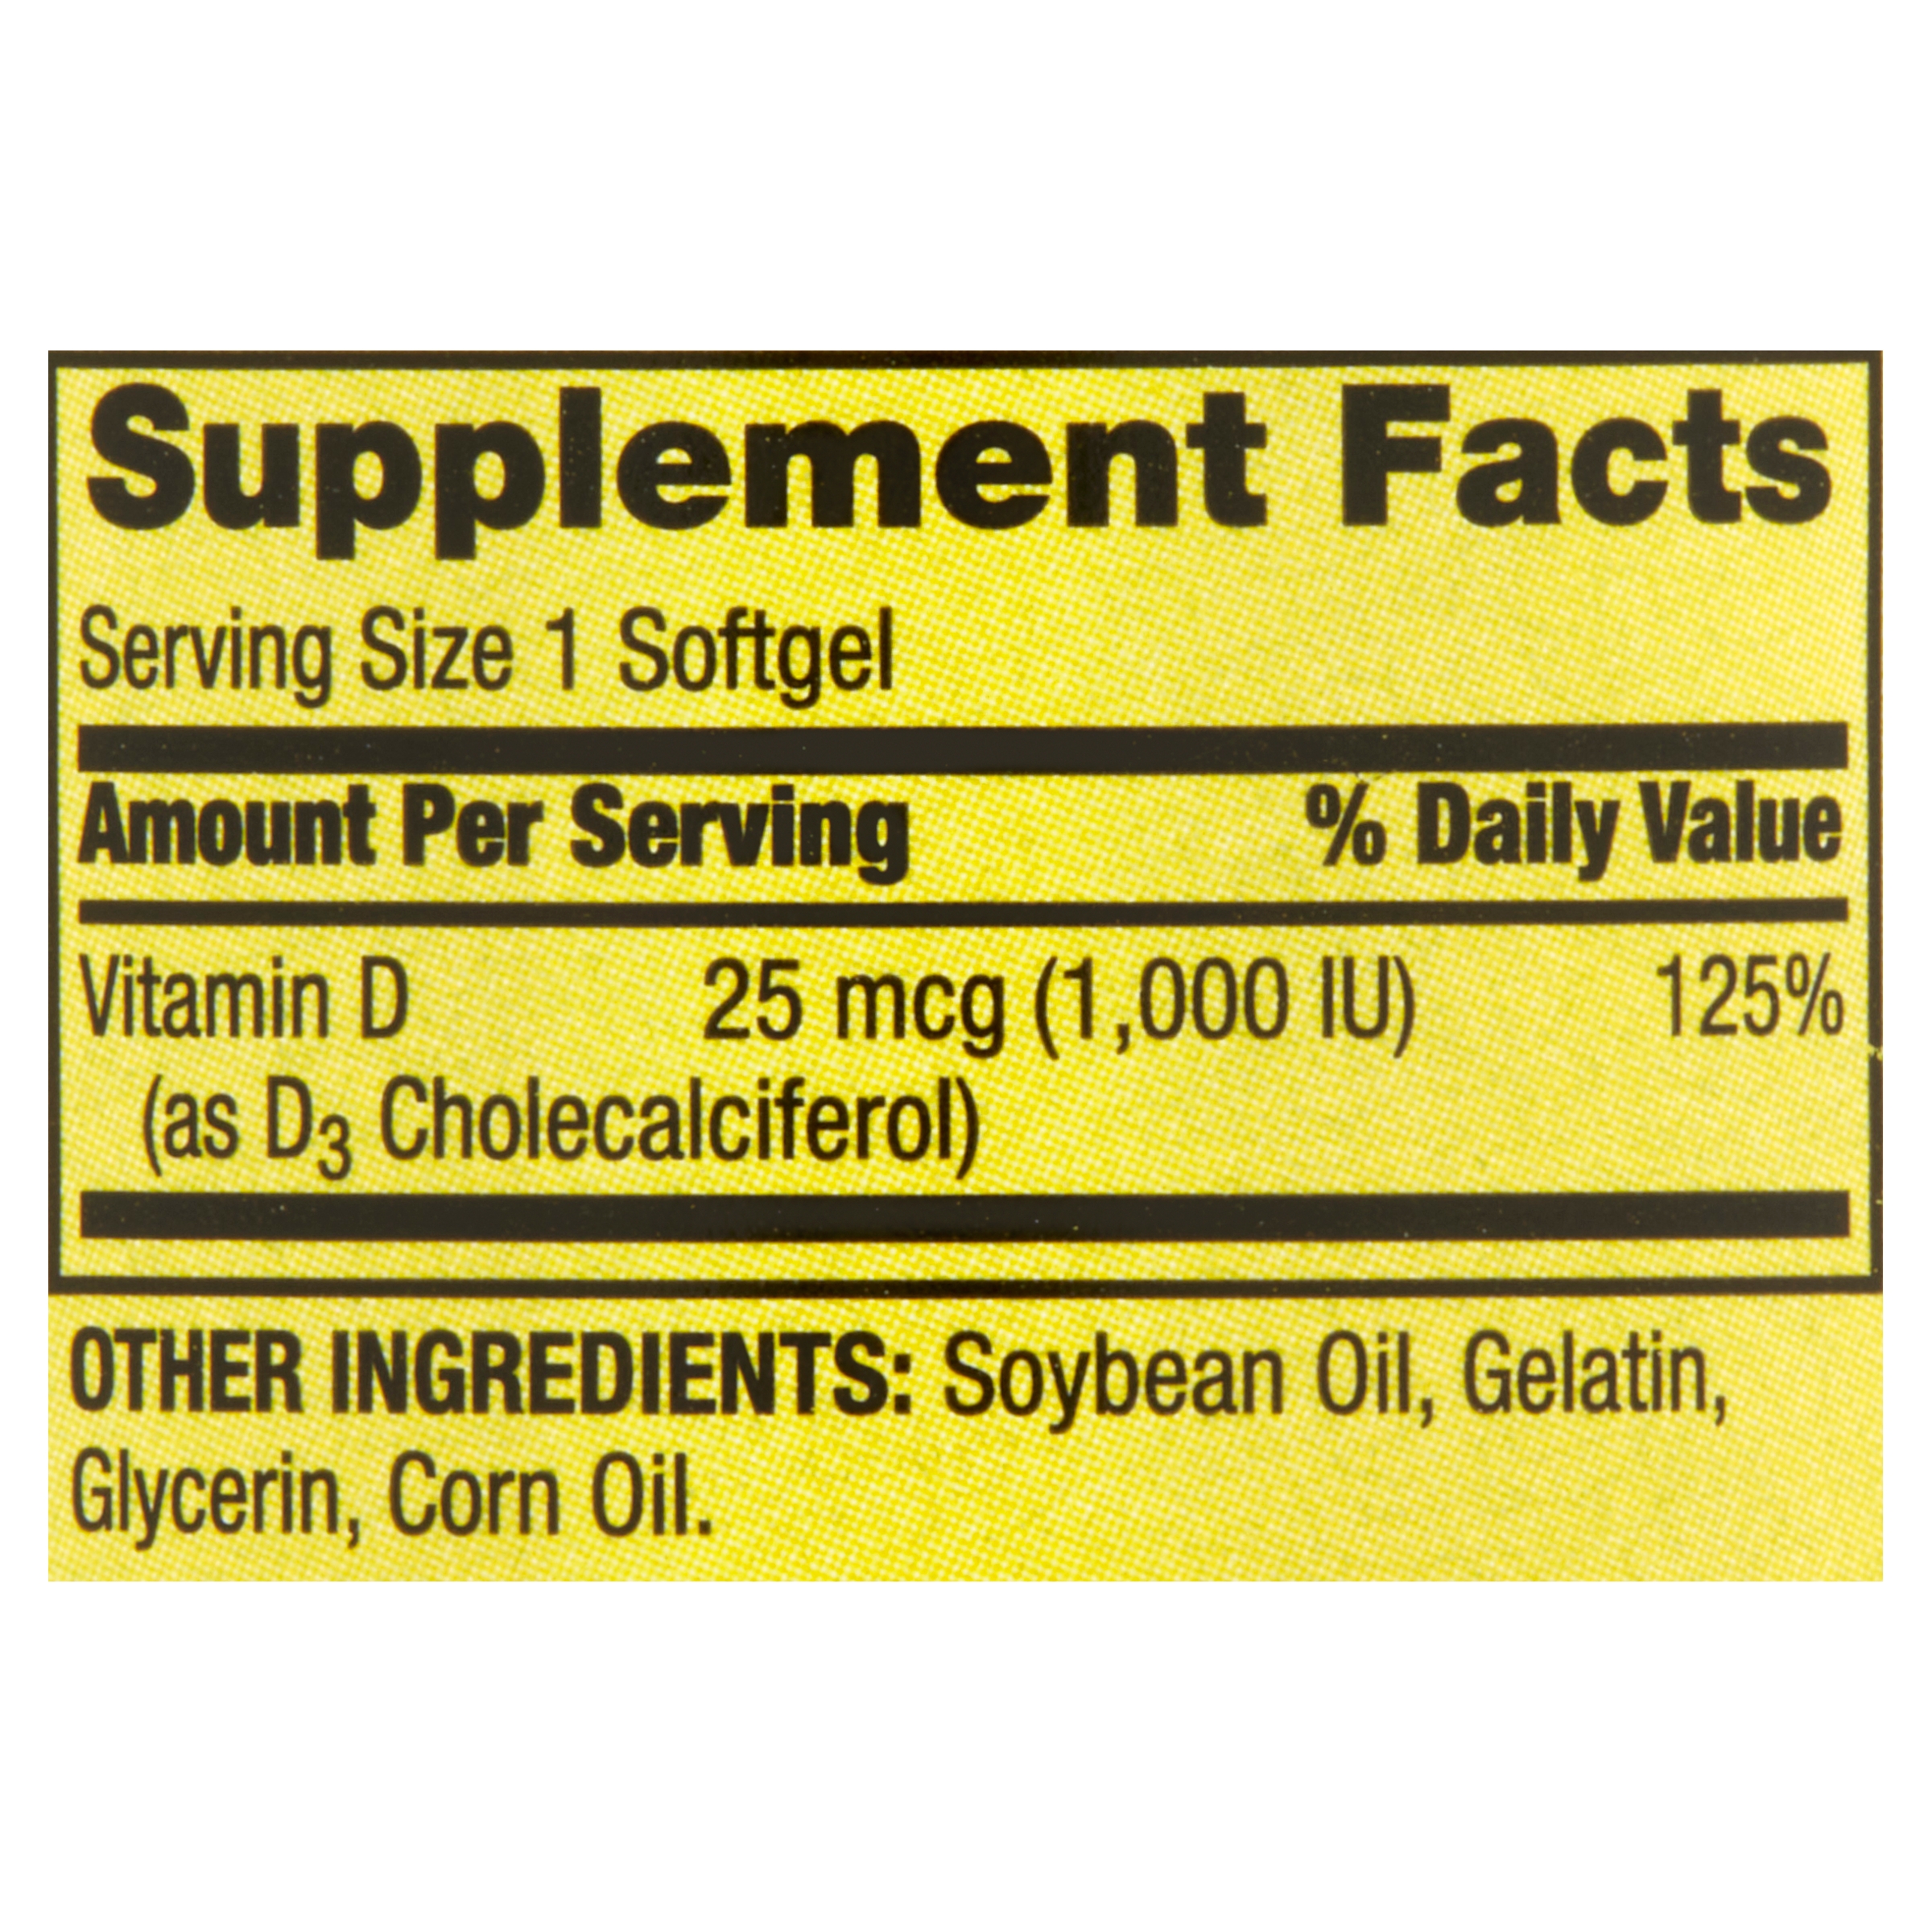 Spring Valley Vitamin D3 Softgels, 25mcg, 1,000 IU, 100 Count, 2 Pack - image 2 of 10